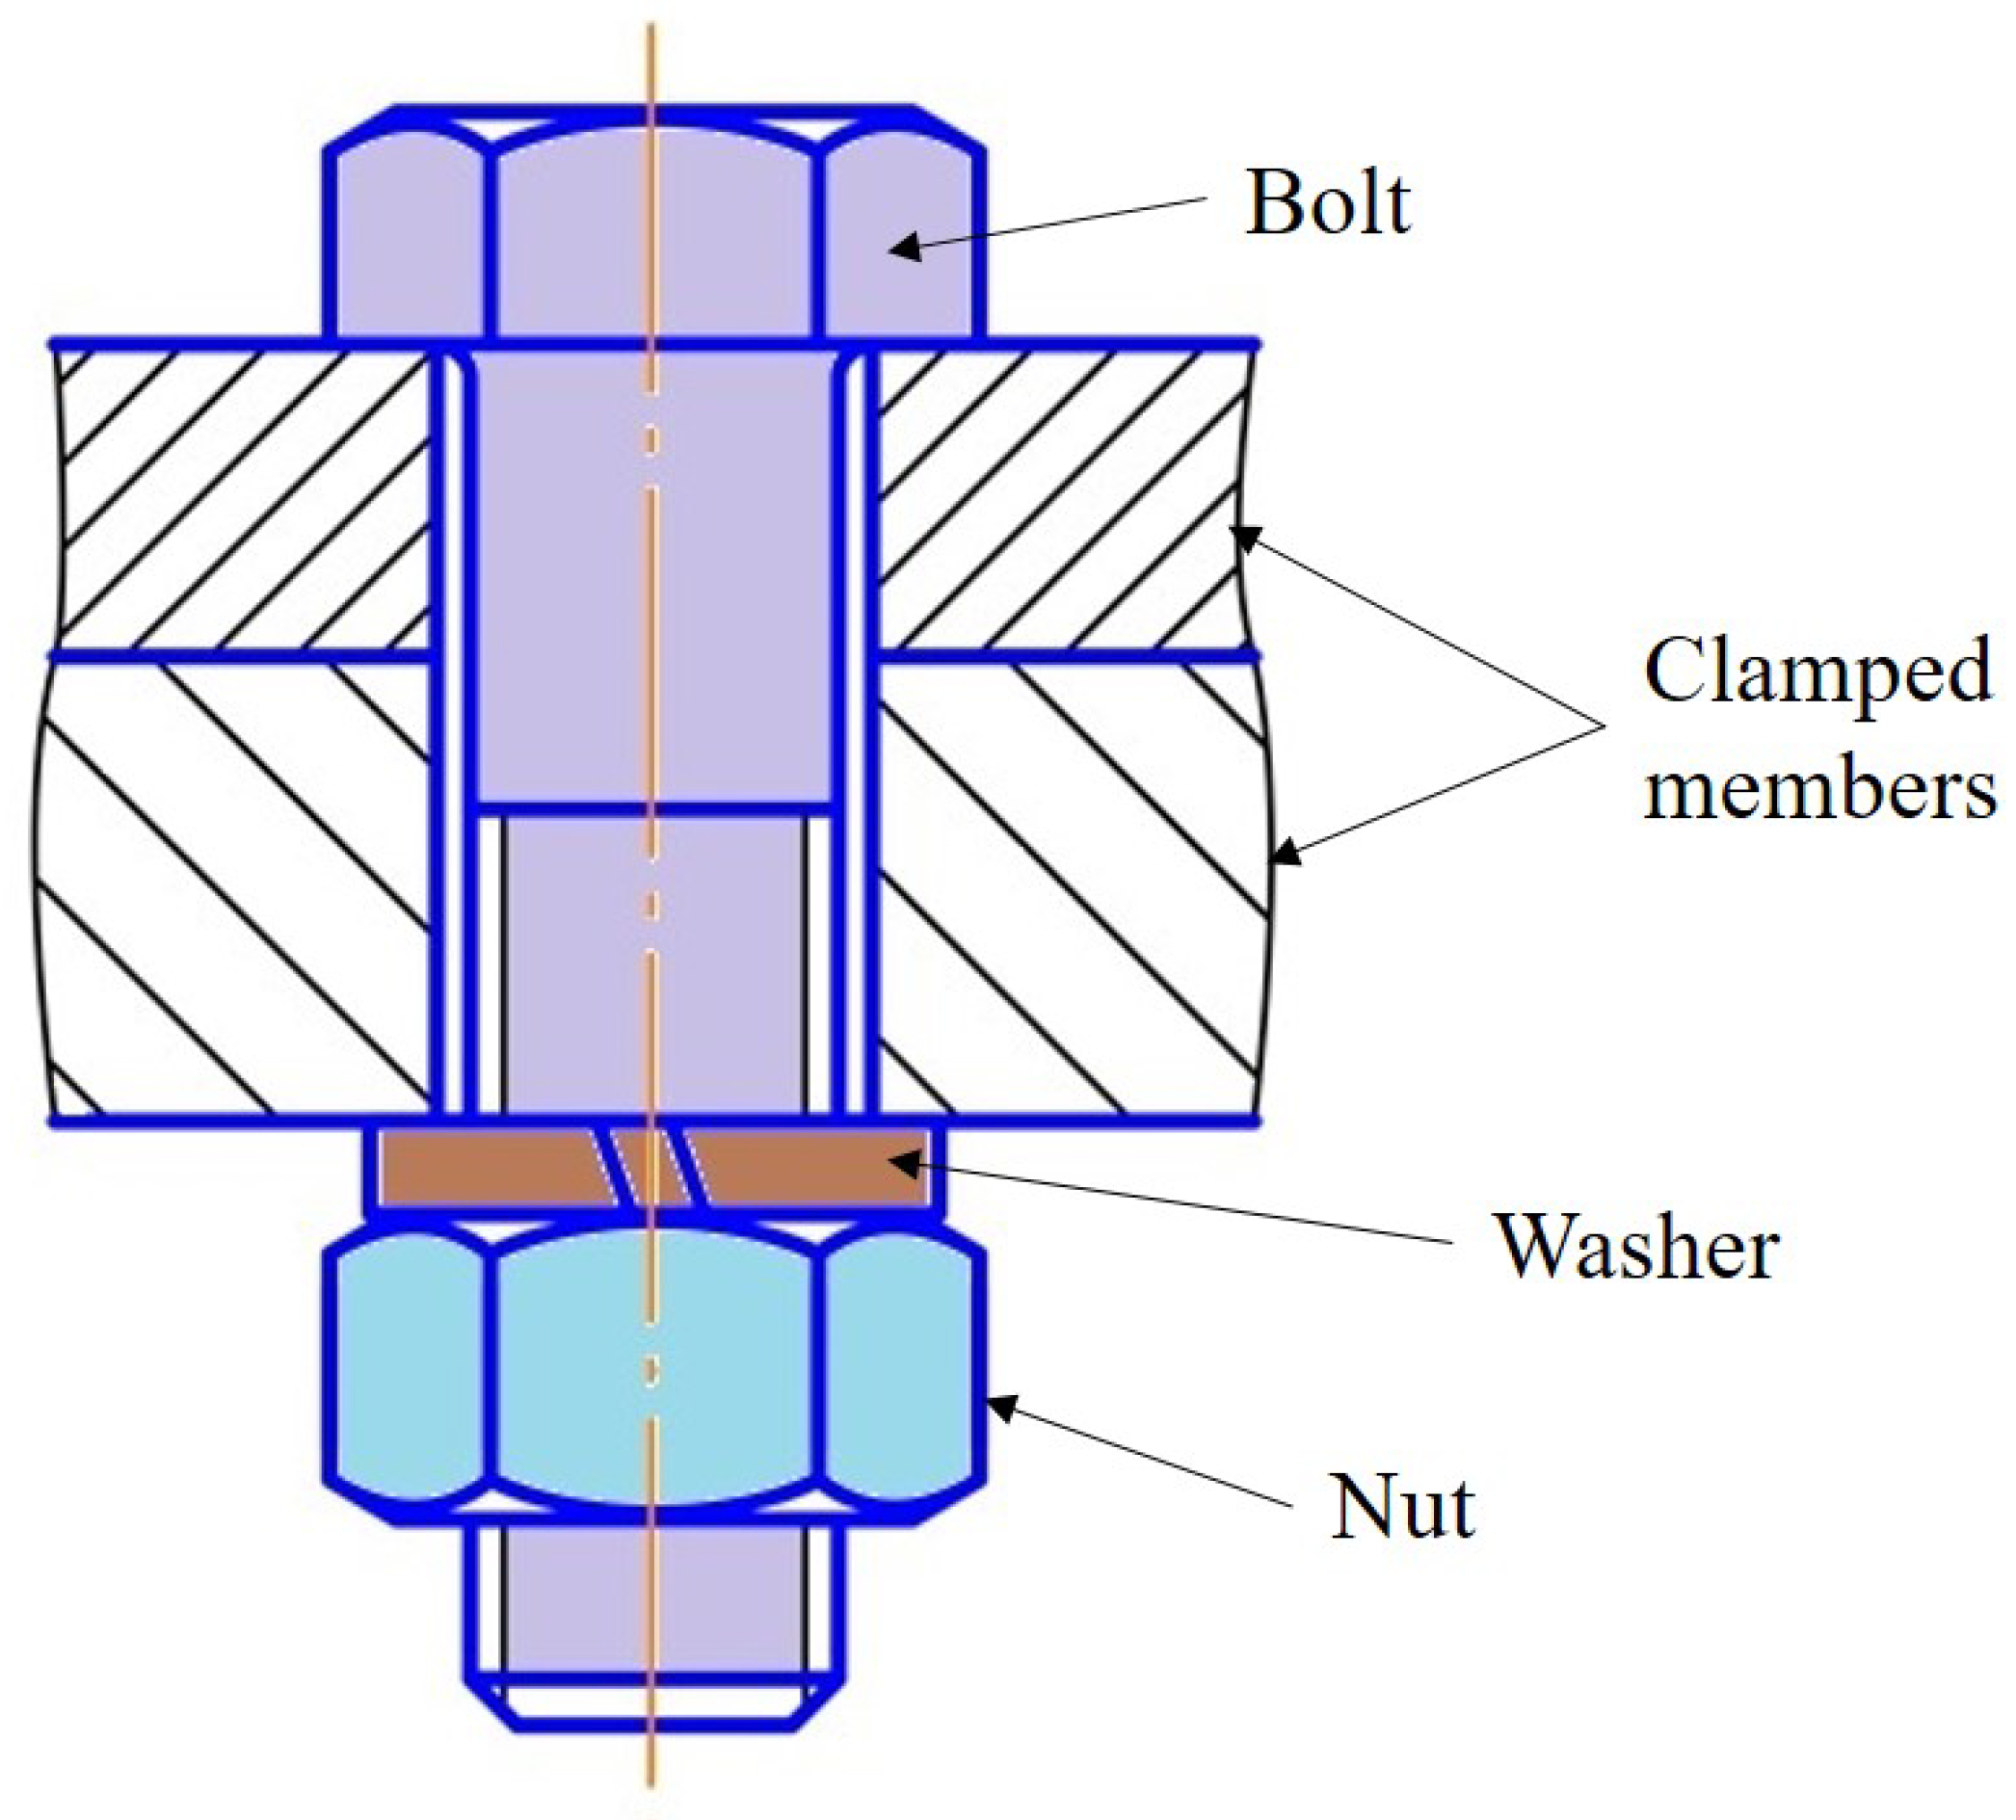 Geometry and Mesh of the Bolt, Washer and Nut